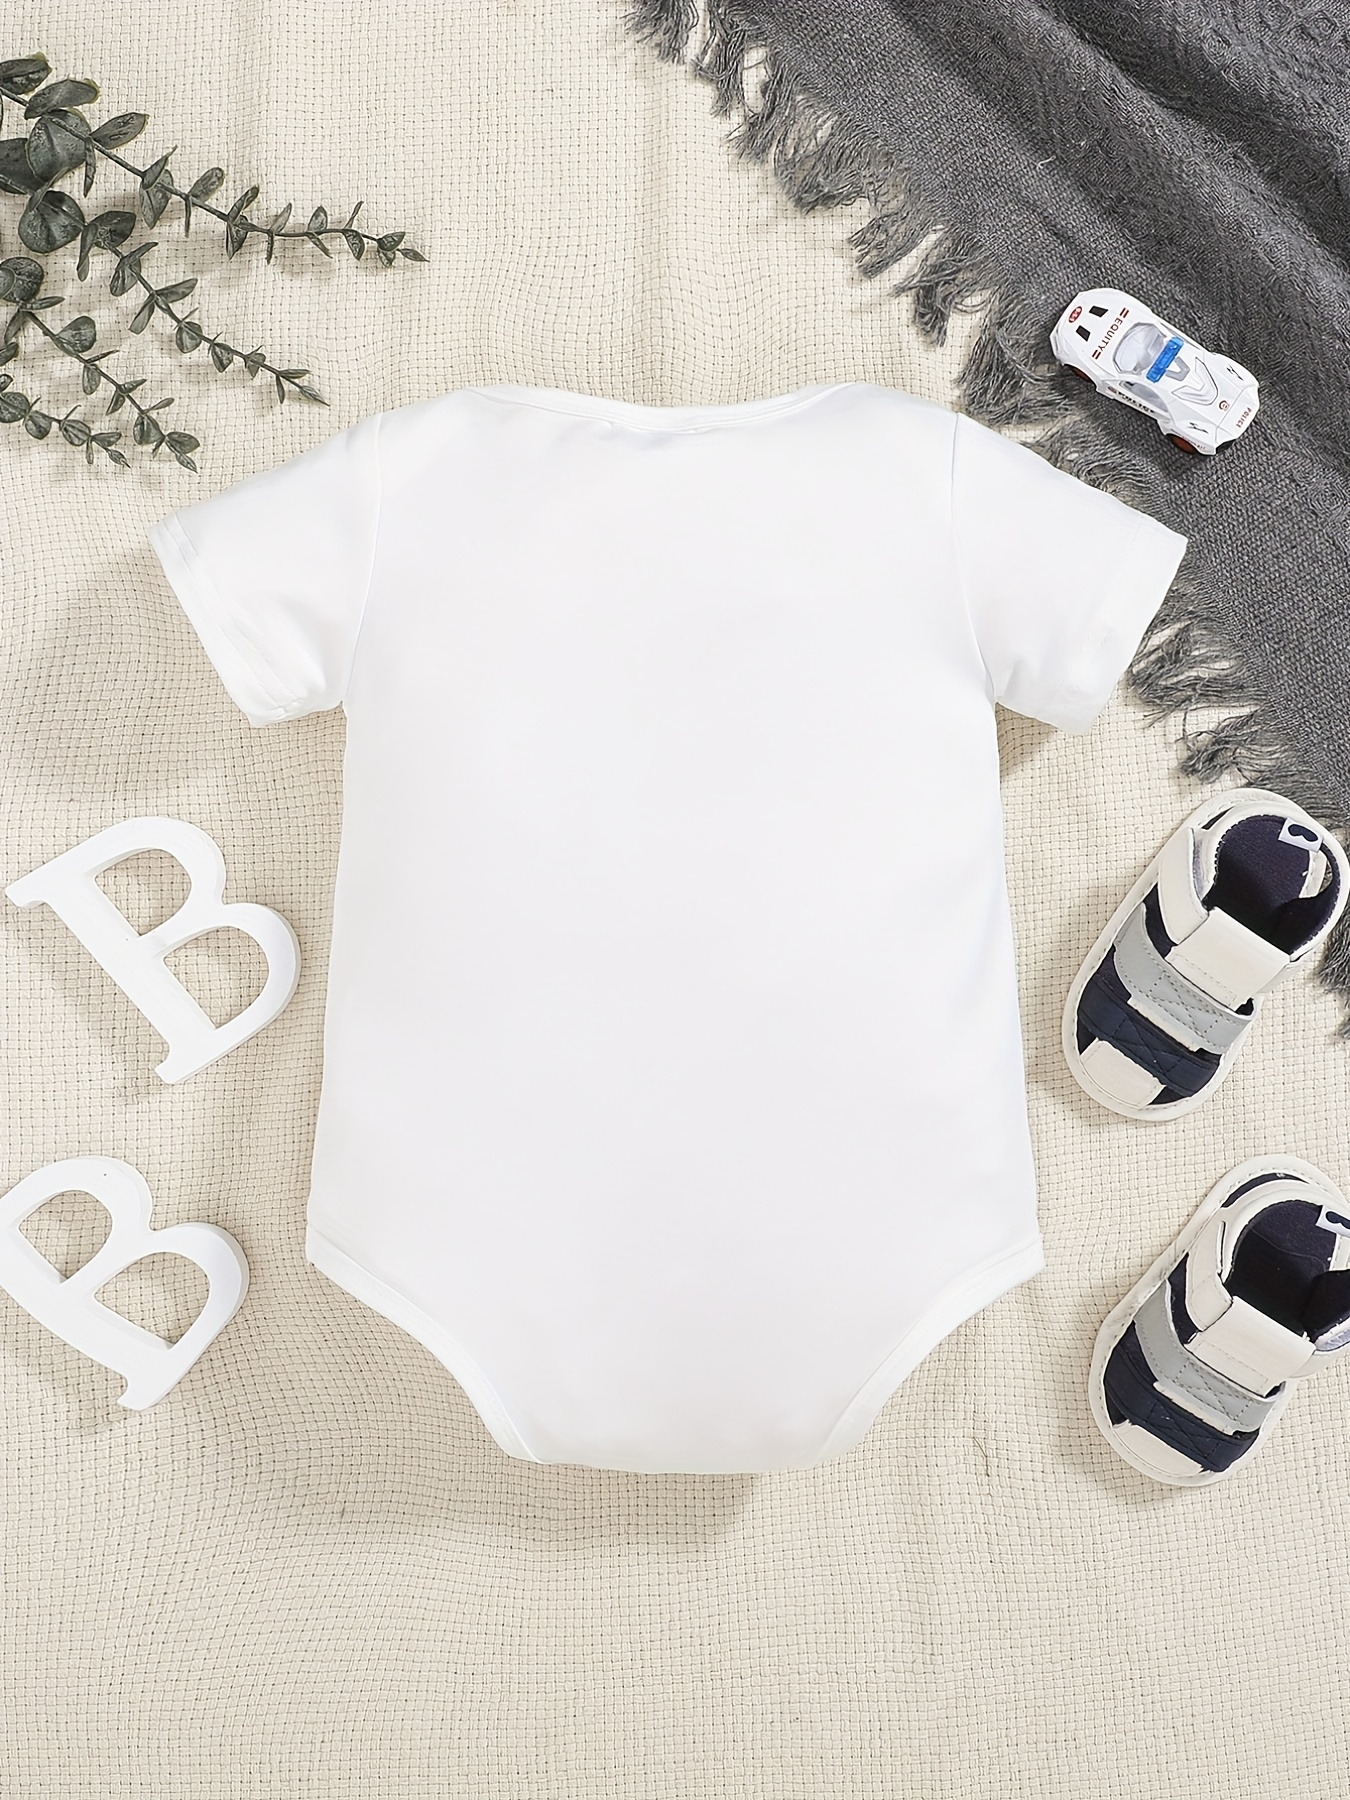 Grandma Spoils Me With Grandpa's Money Coming Home Outfit for Baby Boy  Short Sleeve Girls Newborn Outfit White Baby Boy Rompe : :  Clothing, Shoes & Accessories